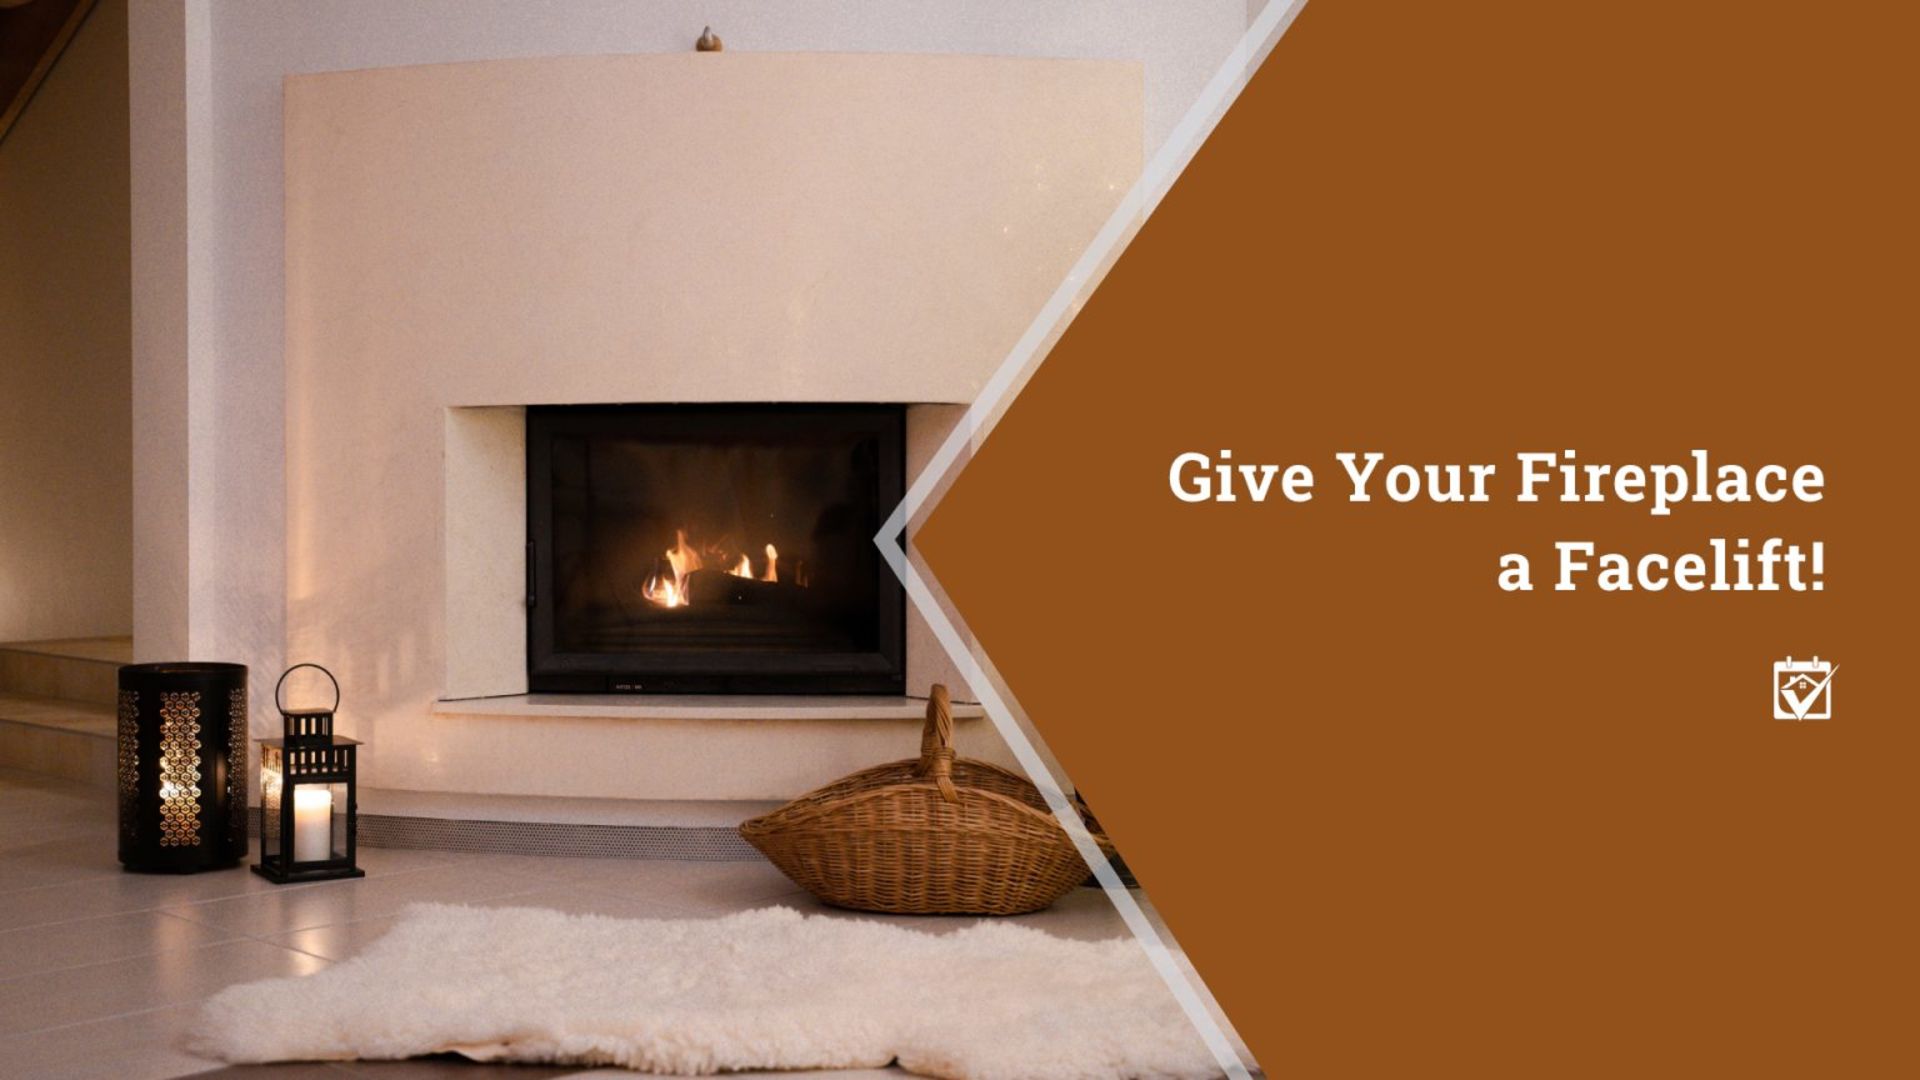 Give Your Fireplace a Facelift!